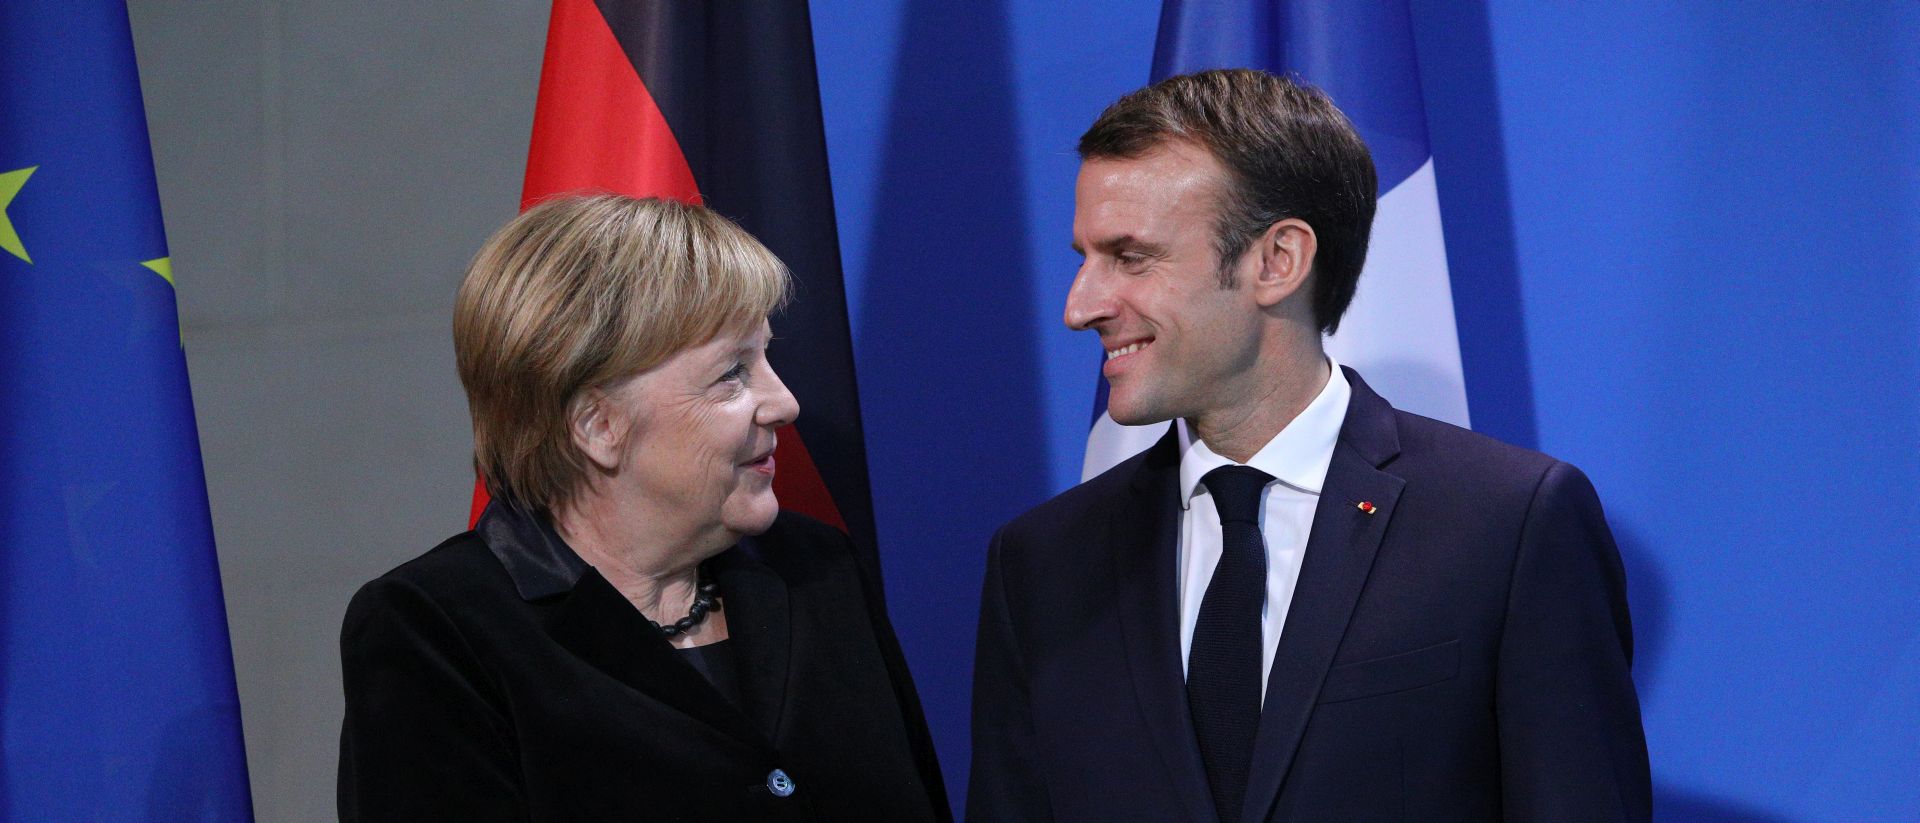 epa07175347 German Chancellor Angela Merkel and French President Emmanuel Macron,shake hands during a joint press conference at the German Chancellery in Berlin, Germany, 18 November 2018. German Chancellor Angela Merkel and French President Emmanuel Macron met for bilateral talks following their participation in a ceremony for the National day of mourning for the victims of wars and dictatorship.  EPA/OMER MESSINGER